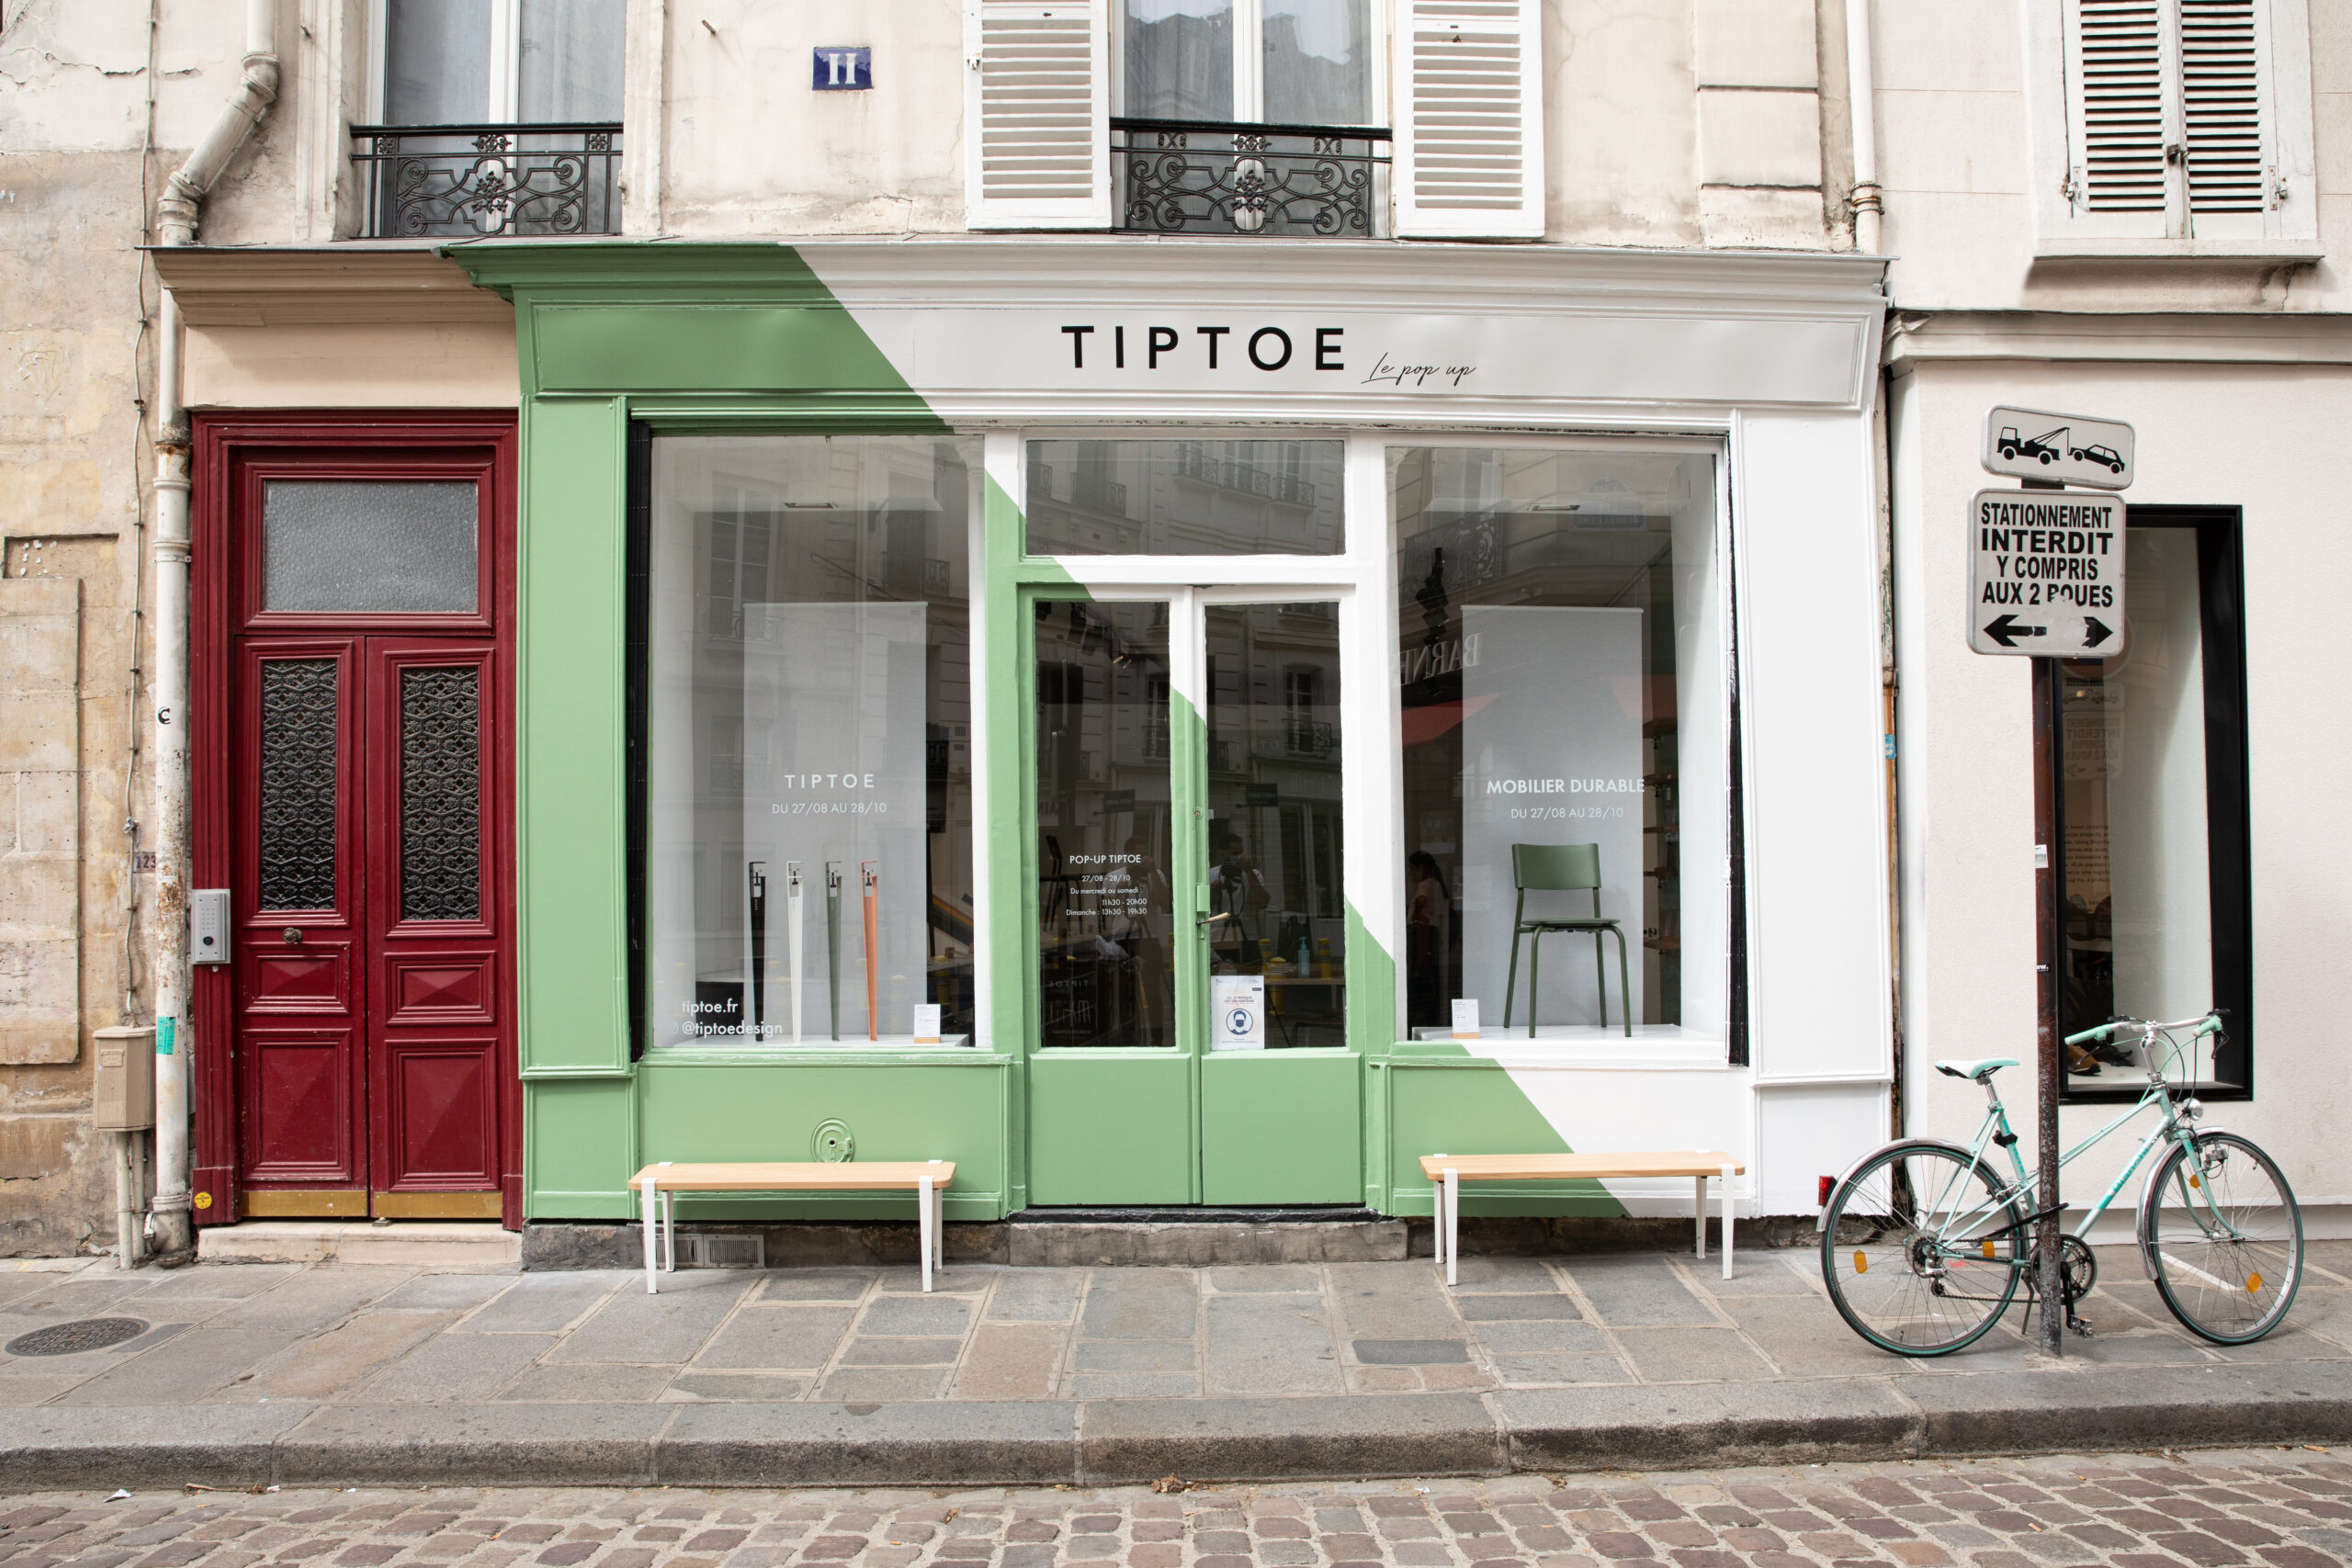 TIPTOE opens its first pop-up store in Paris!